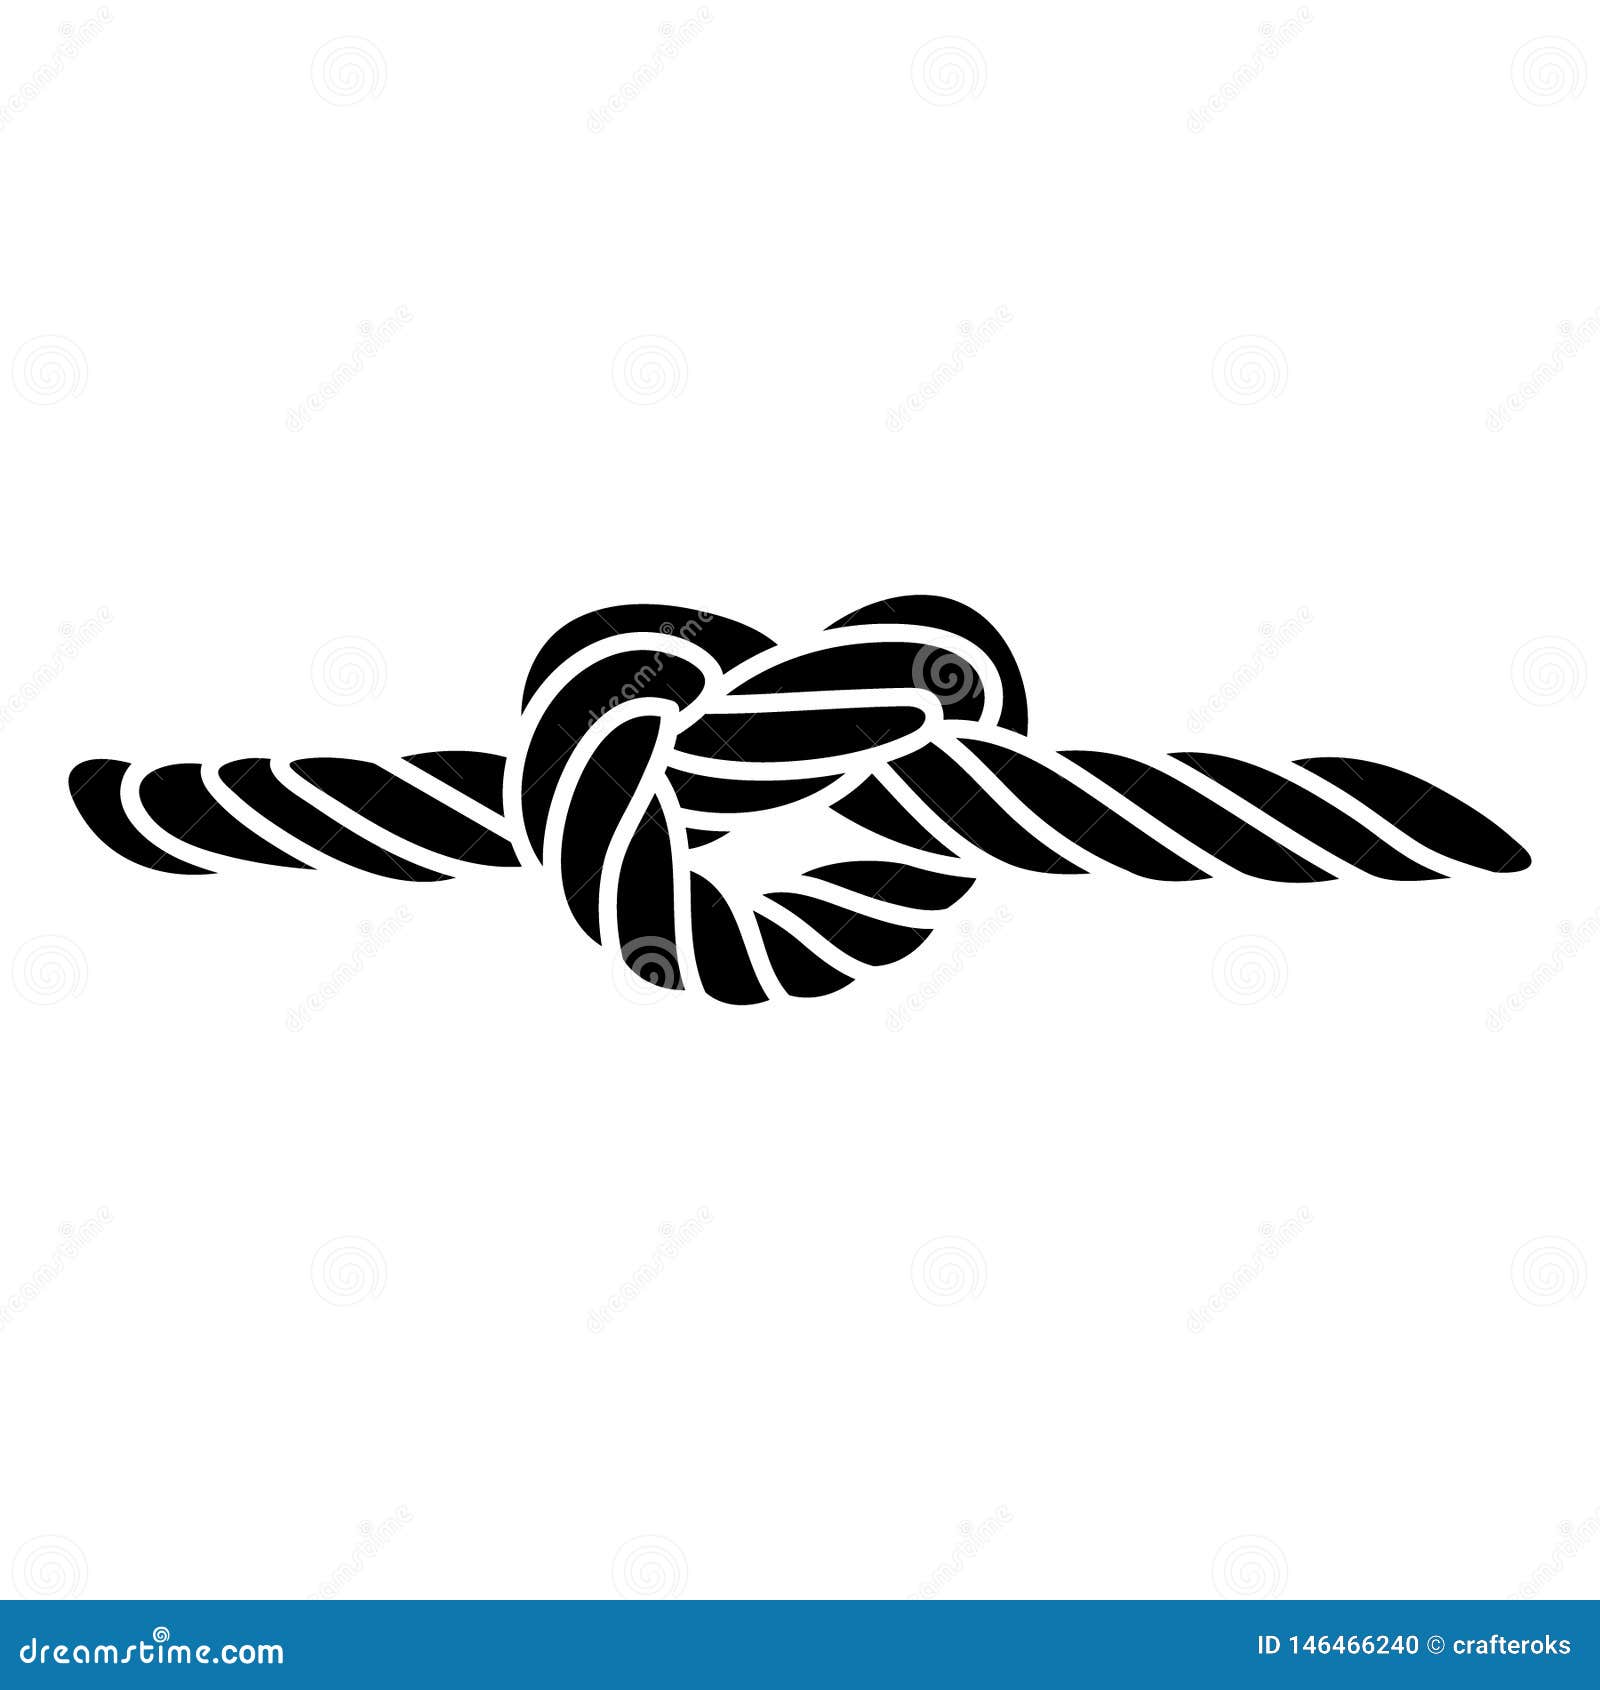 Rope Knot Vector, Hand Drawn, Vector, Eps, Logo, Icon, Crafteroks,  Silhouette Illustration for Different Uses Stock Vector - Illustration of  rope, vector: 146466240